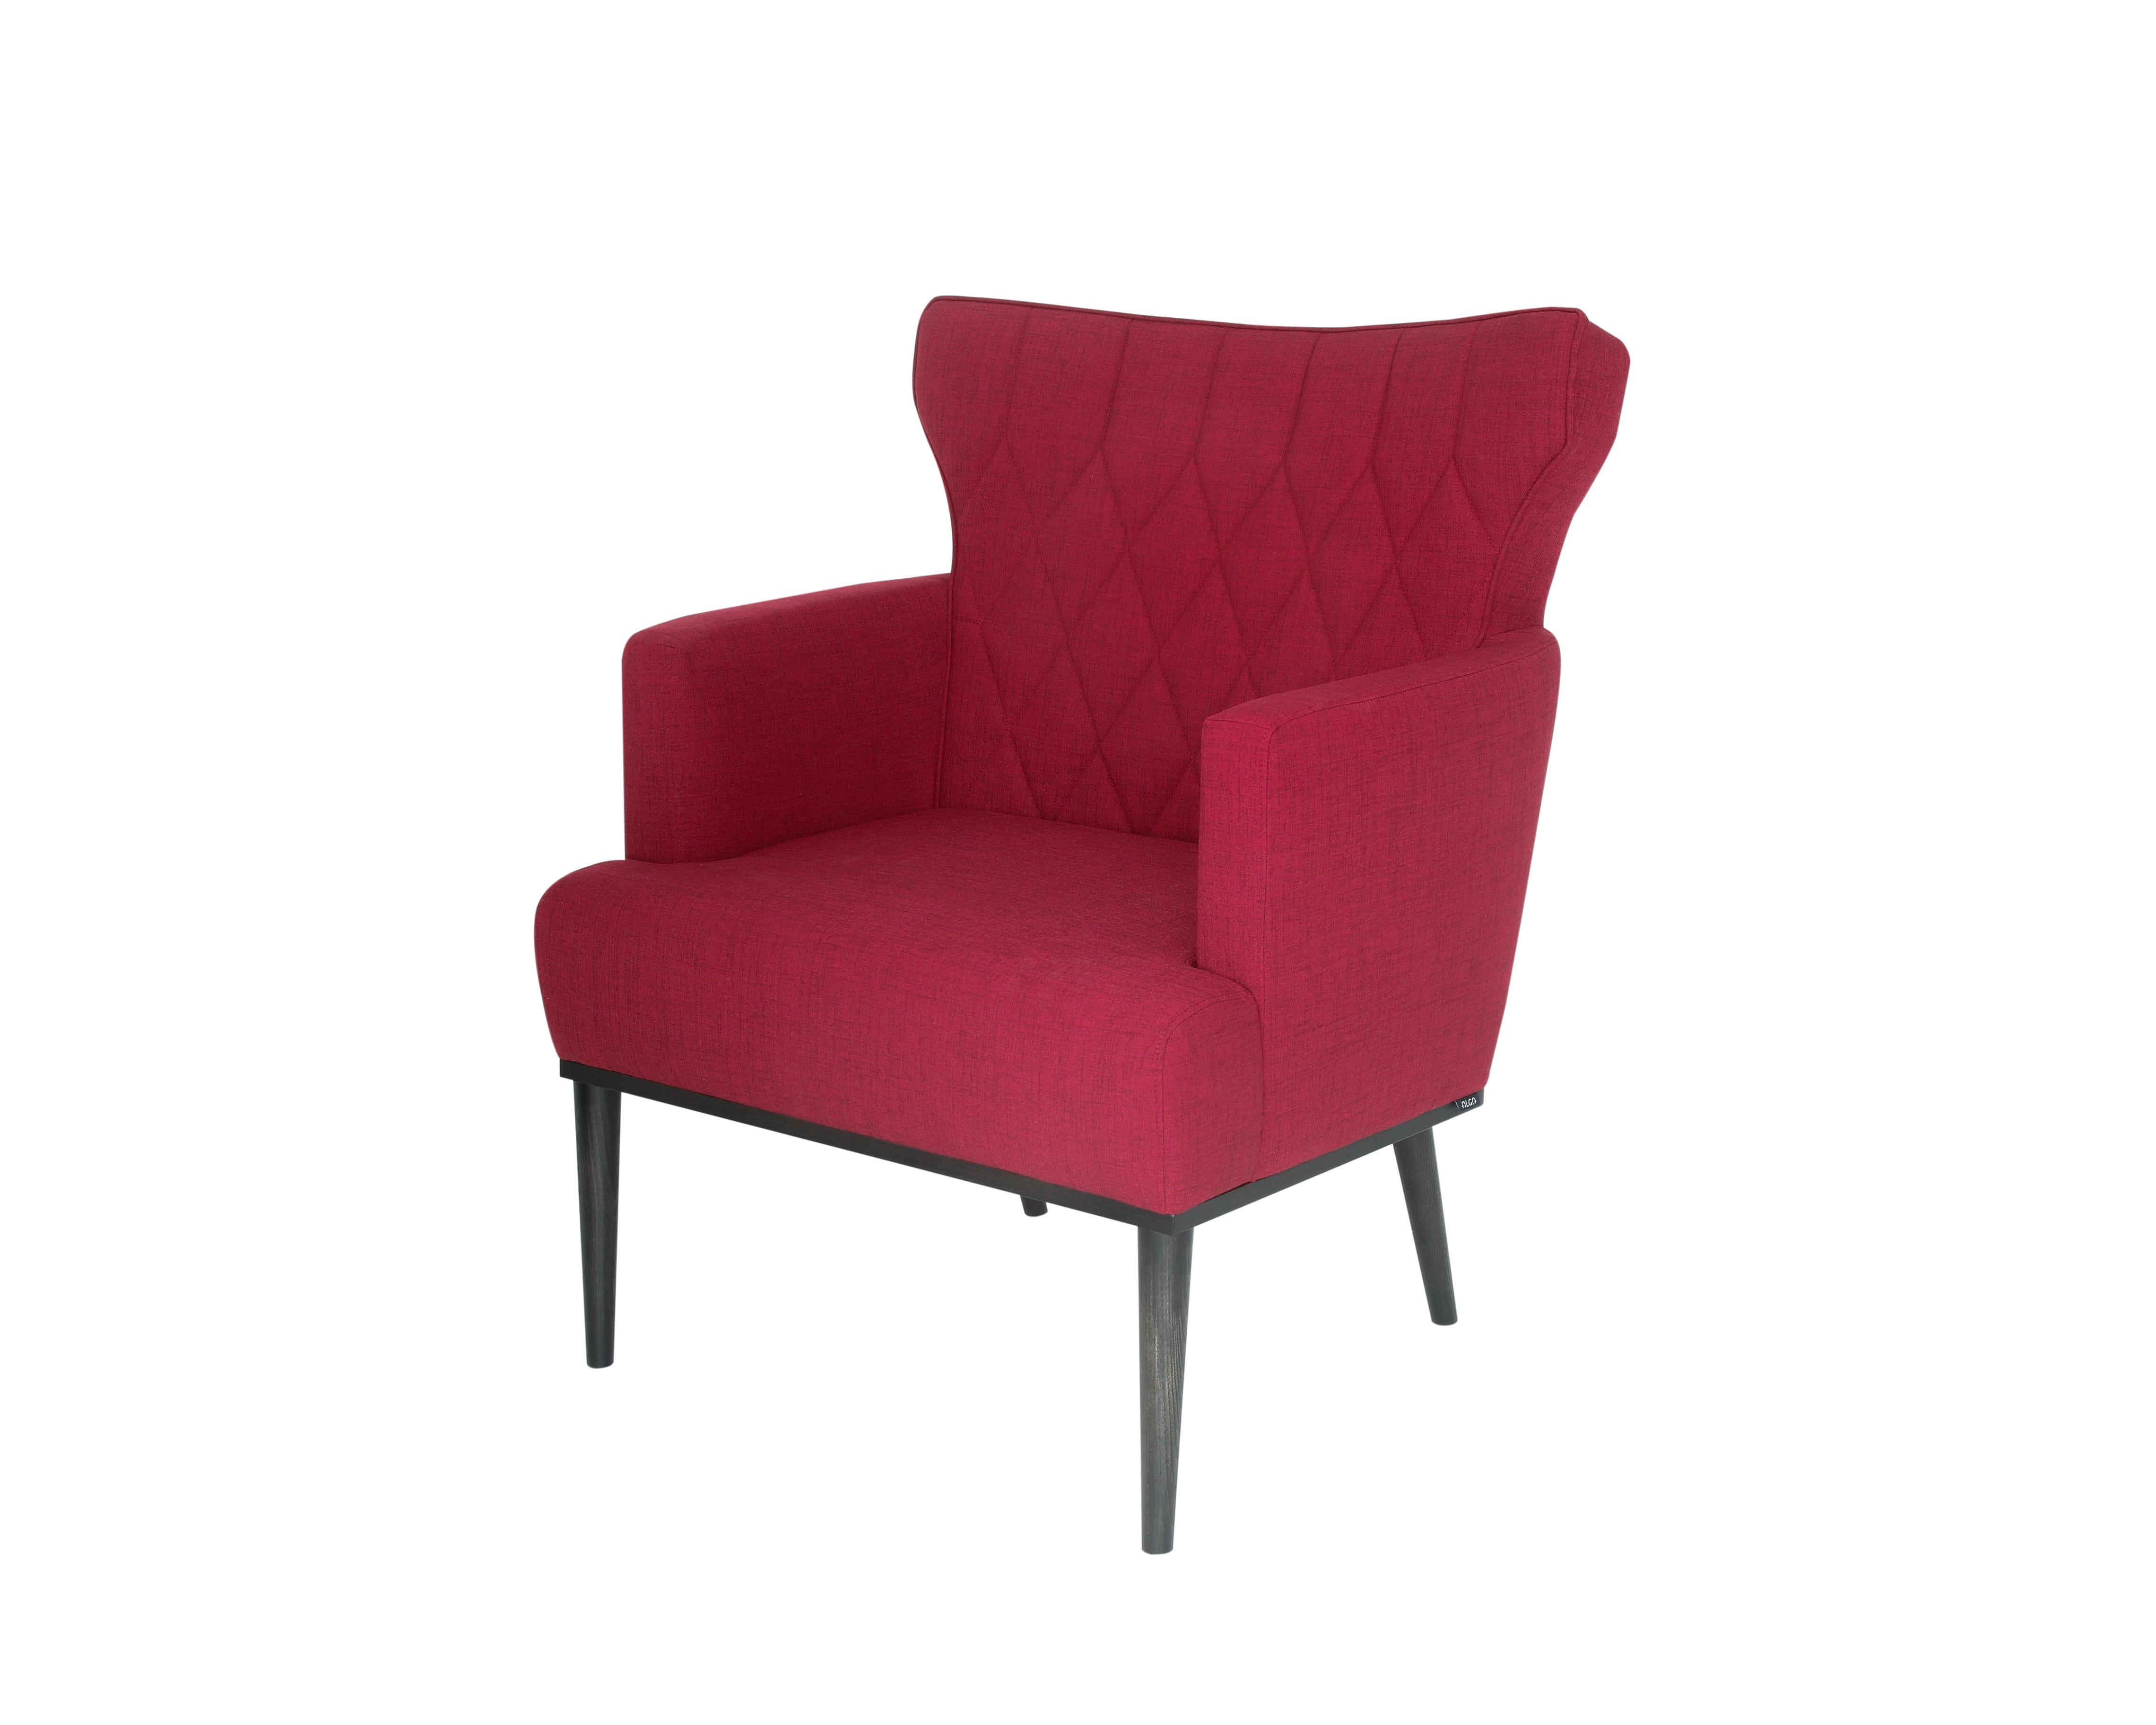 Portuguese Upholstered armchair with stitching detail backrest For Sale